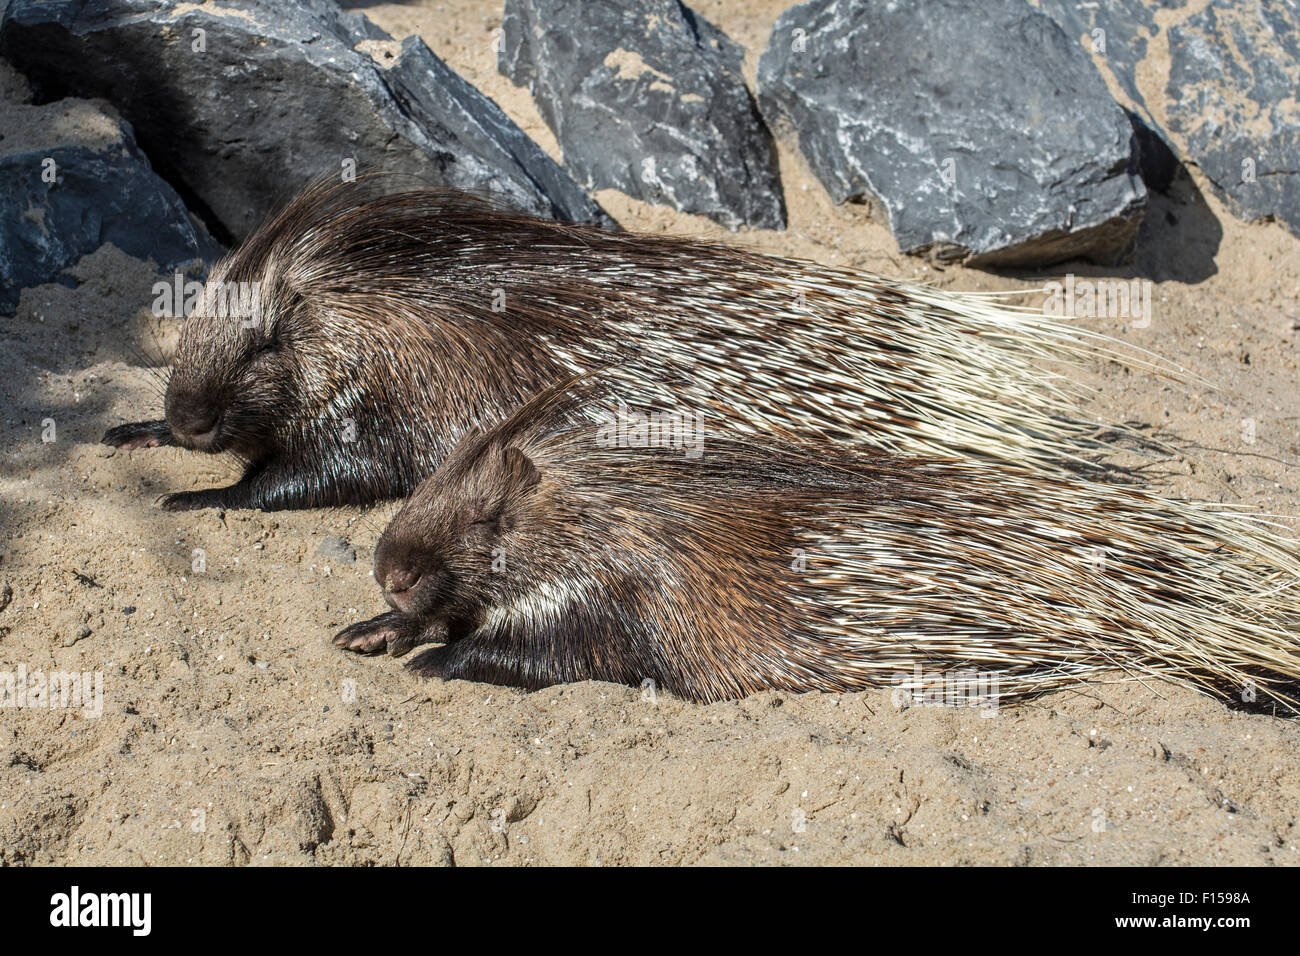 Two Indian Crested Porcupines / Indian Porcupine (Hystrix indica) resting, native to southern Asia and the Middle East Stock Photo